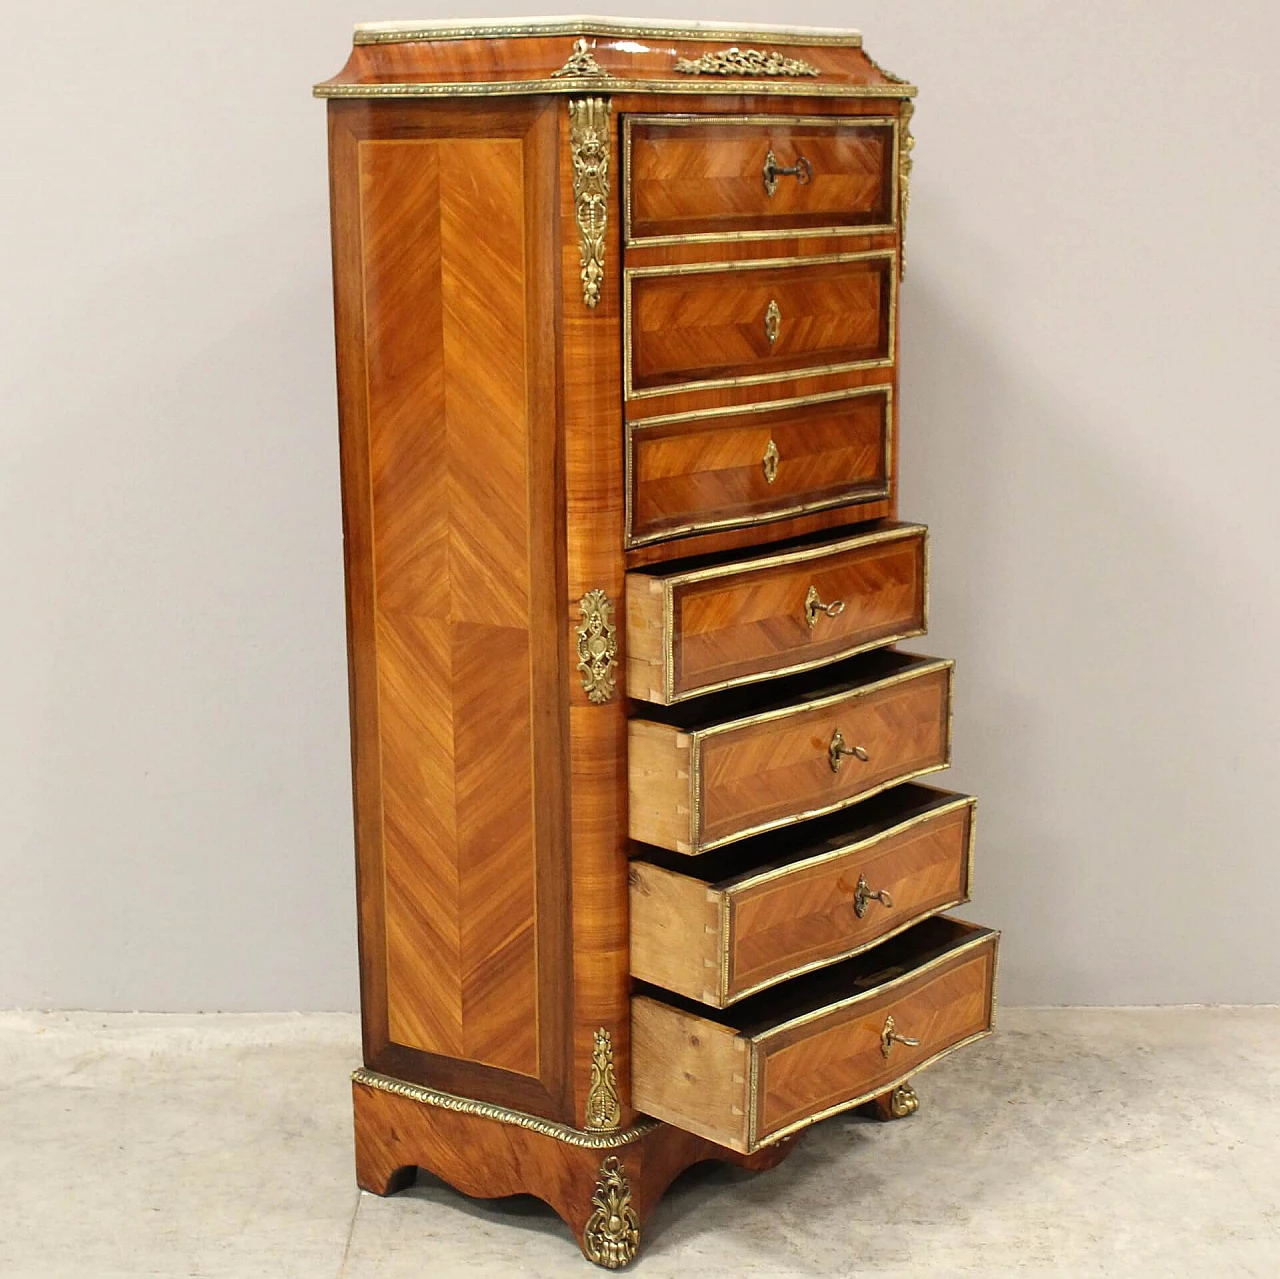 Napoleon III secretaire in bois de rose, rosewood inlay and gilded bronze with marble top, 19th century 10